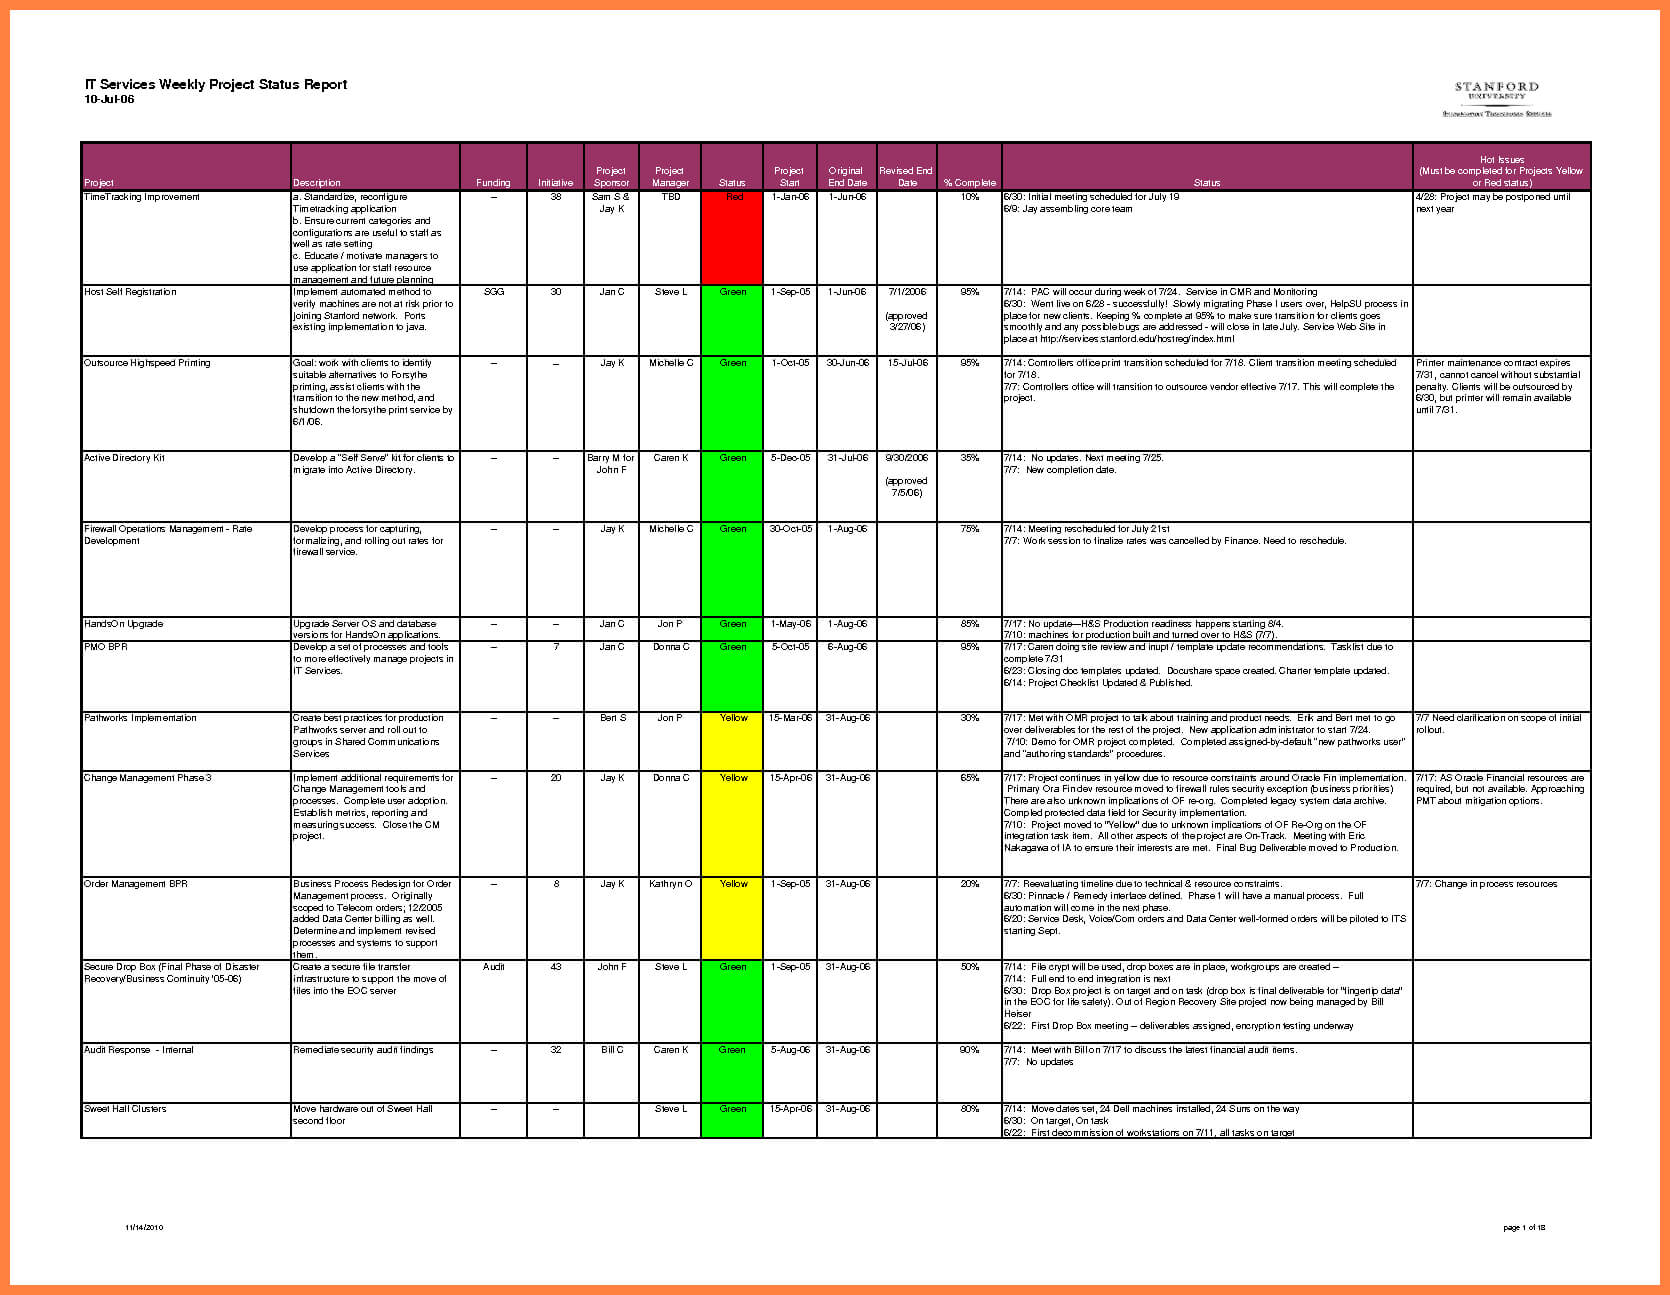 023 Excel Project Status Report Weekly Template 4Vy49Mzf Throughout Weekly Status Report Template Excel